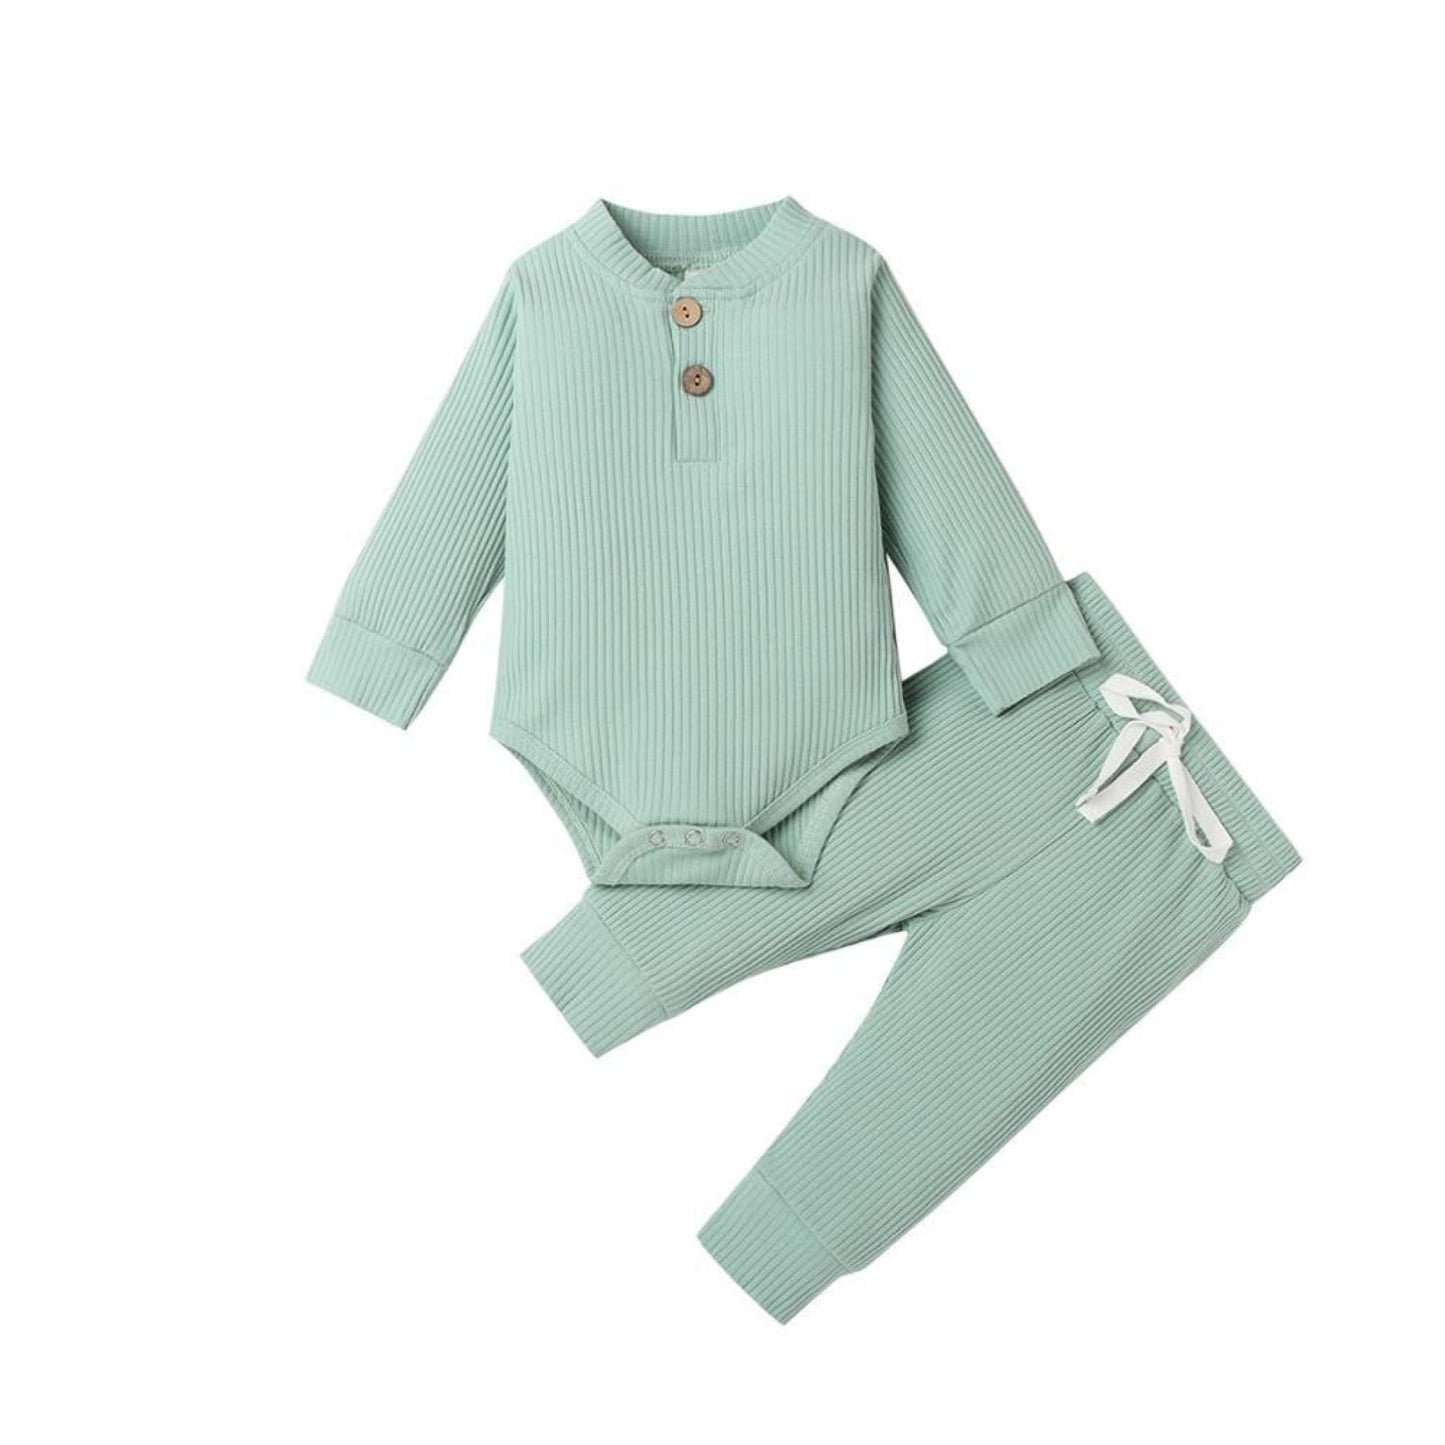 Light green baby track suit with romper or onesie and pants- Hunny Bubba Kids